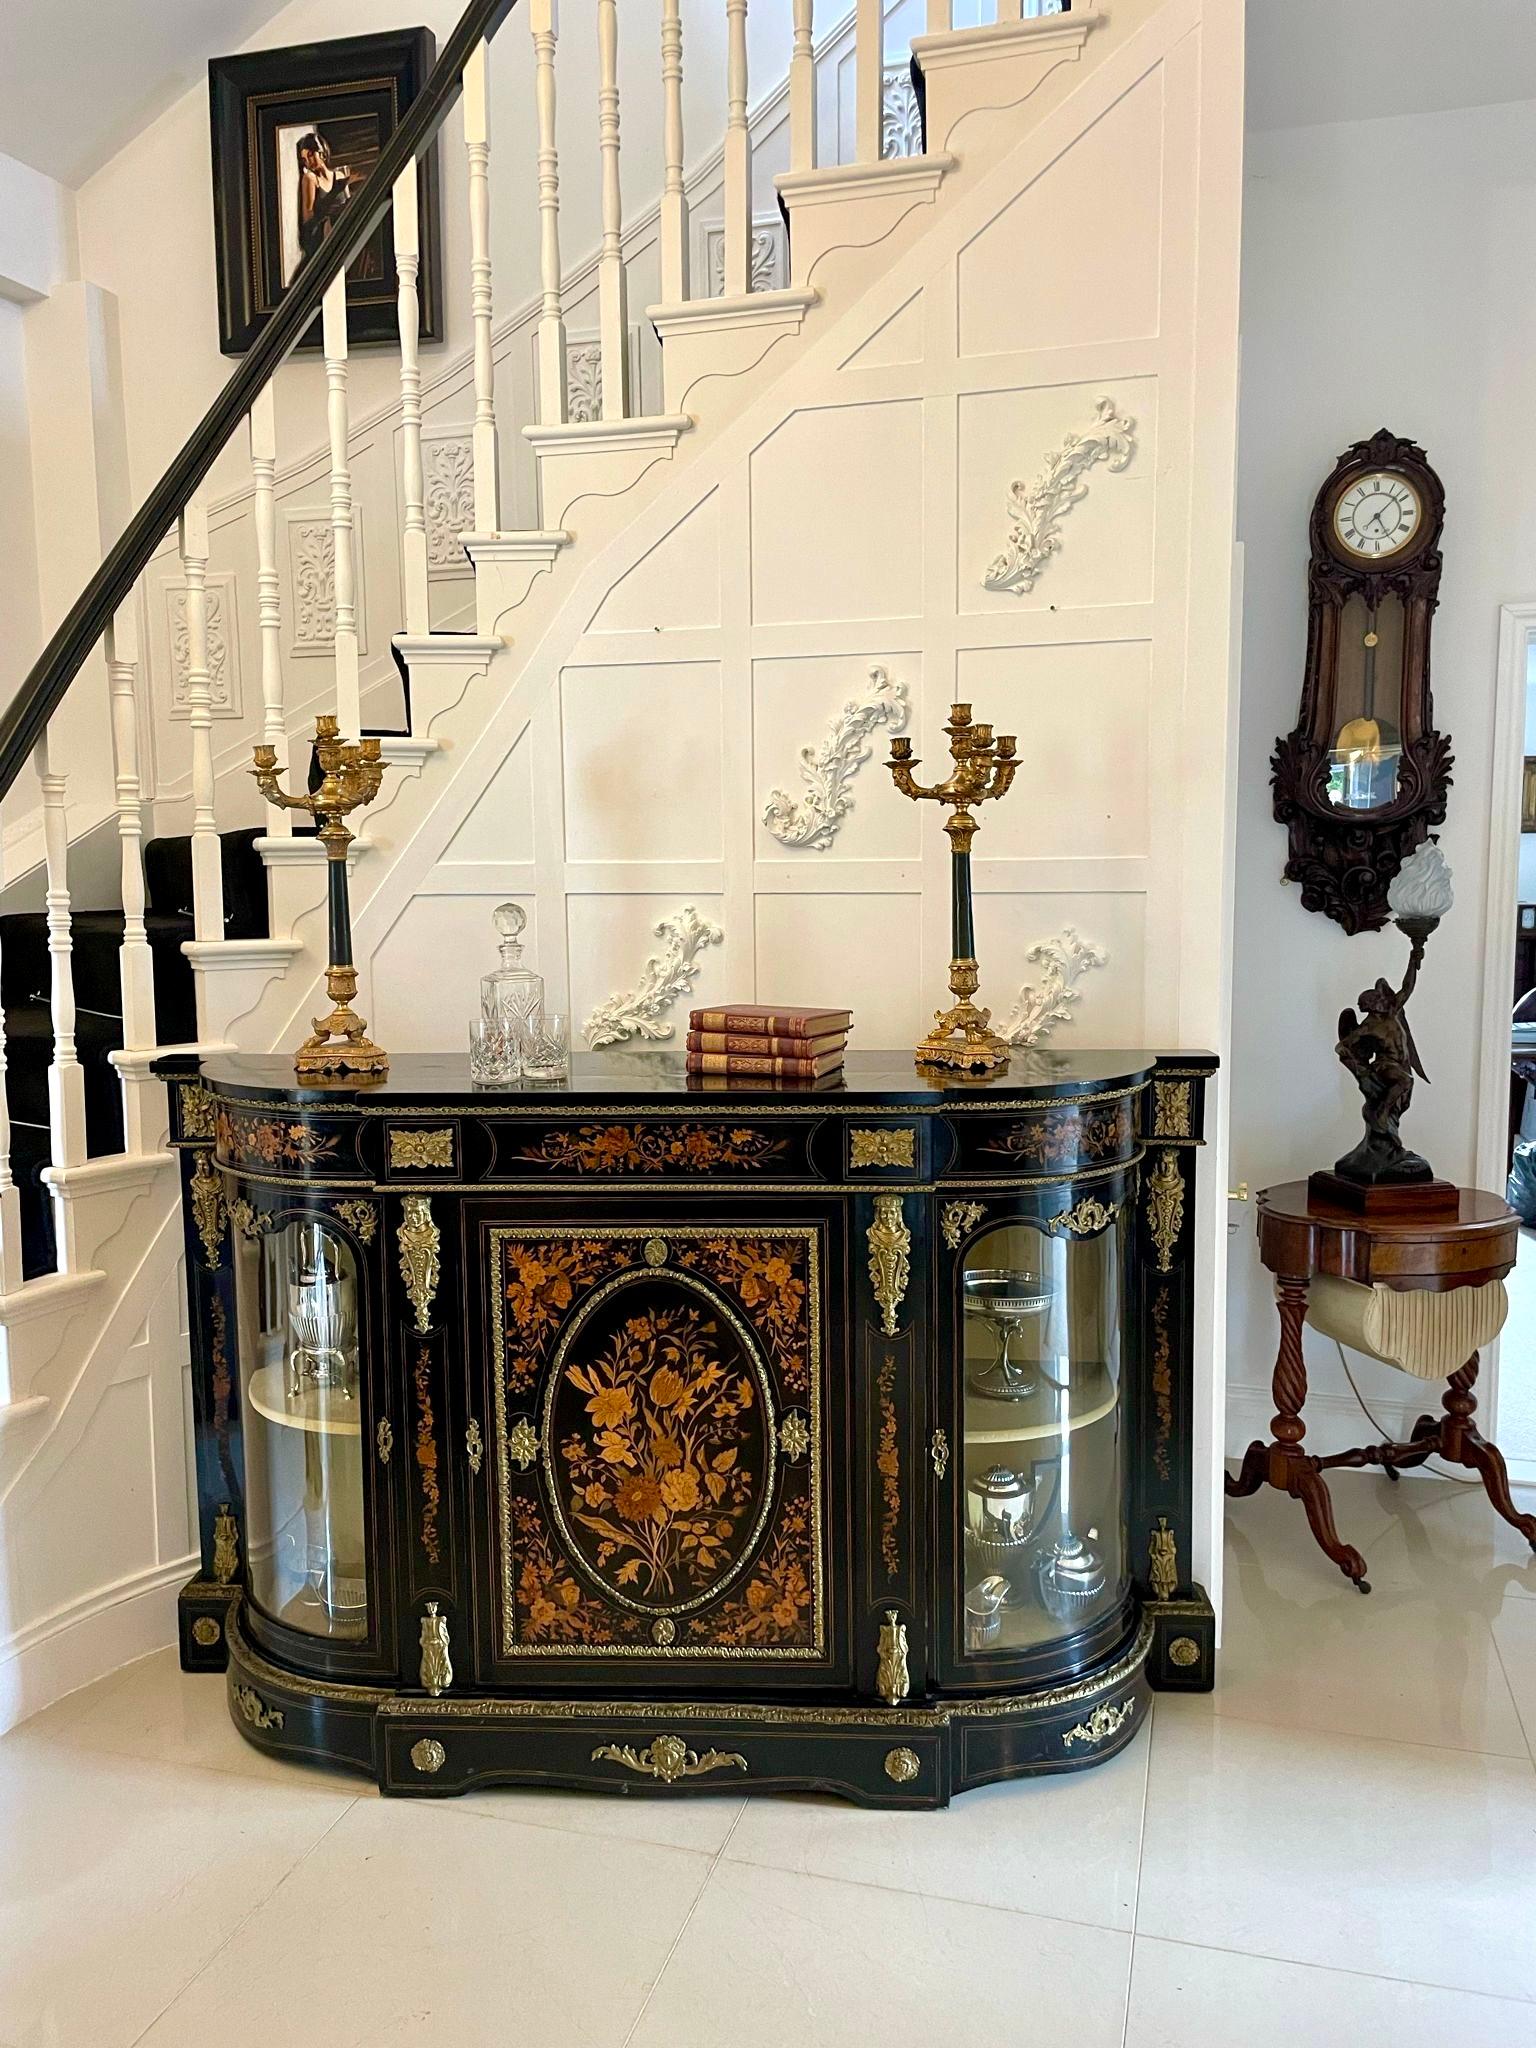 Outstanding quality antique Victorian ebonised and inlaid floral marquetry credenza/sideboard having a ebonised shaped top above an inlaid floral marquetry frieze with ornate ormolu mounts above a majestic inlaid floral marquetry door flanked by two